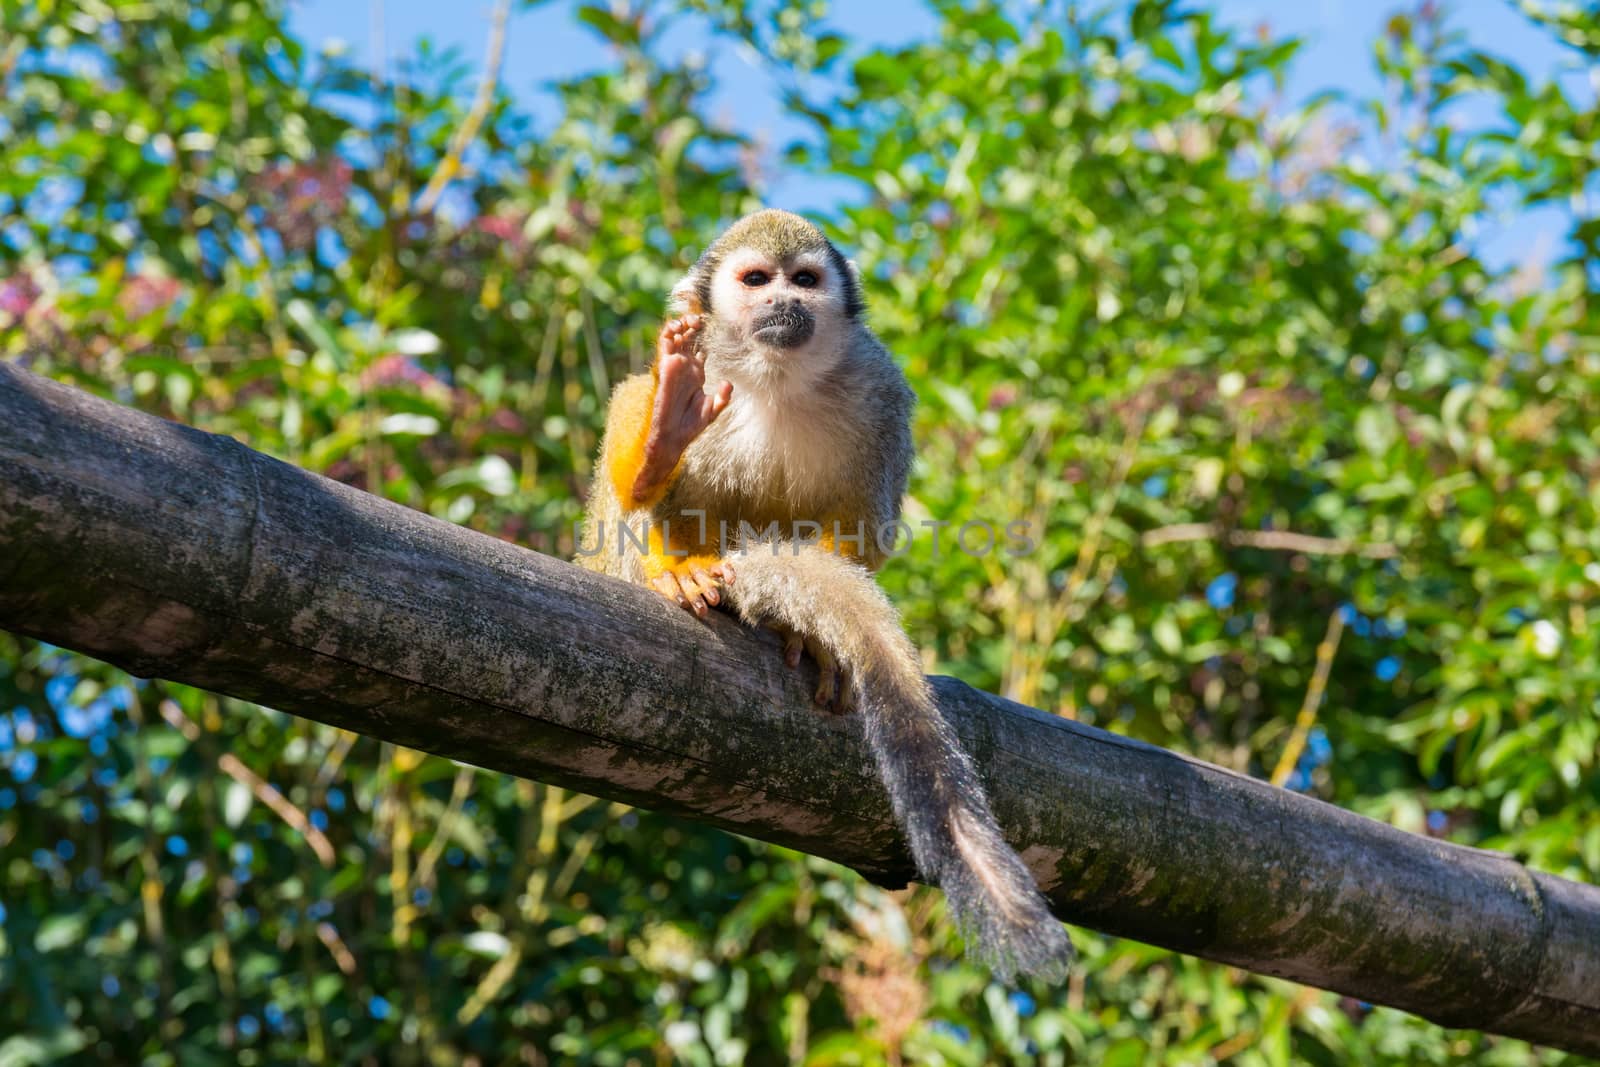 Squirrel monkey playing in the trees during a summer day